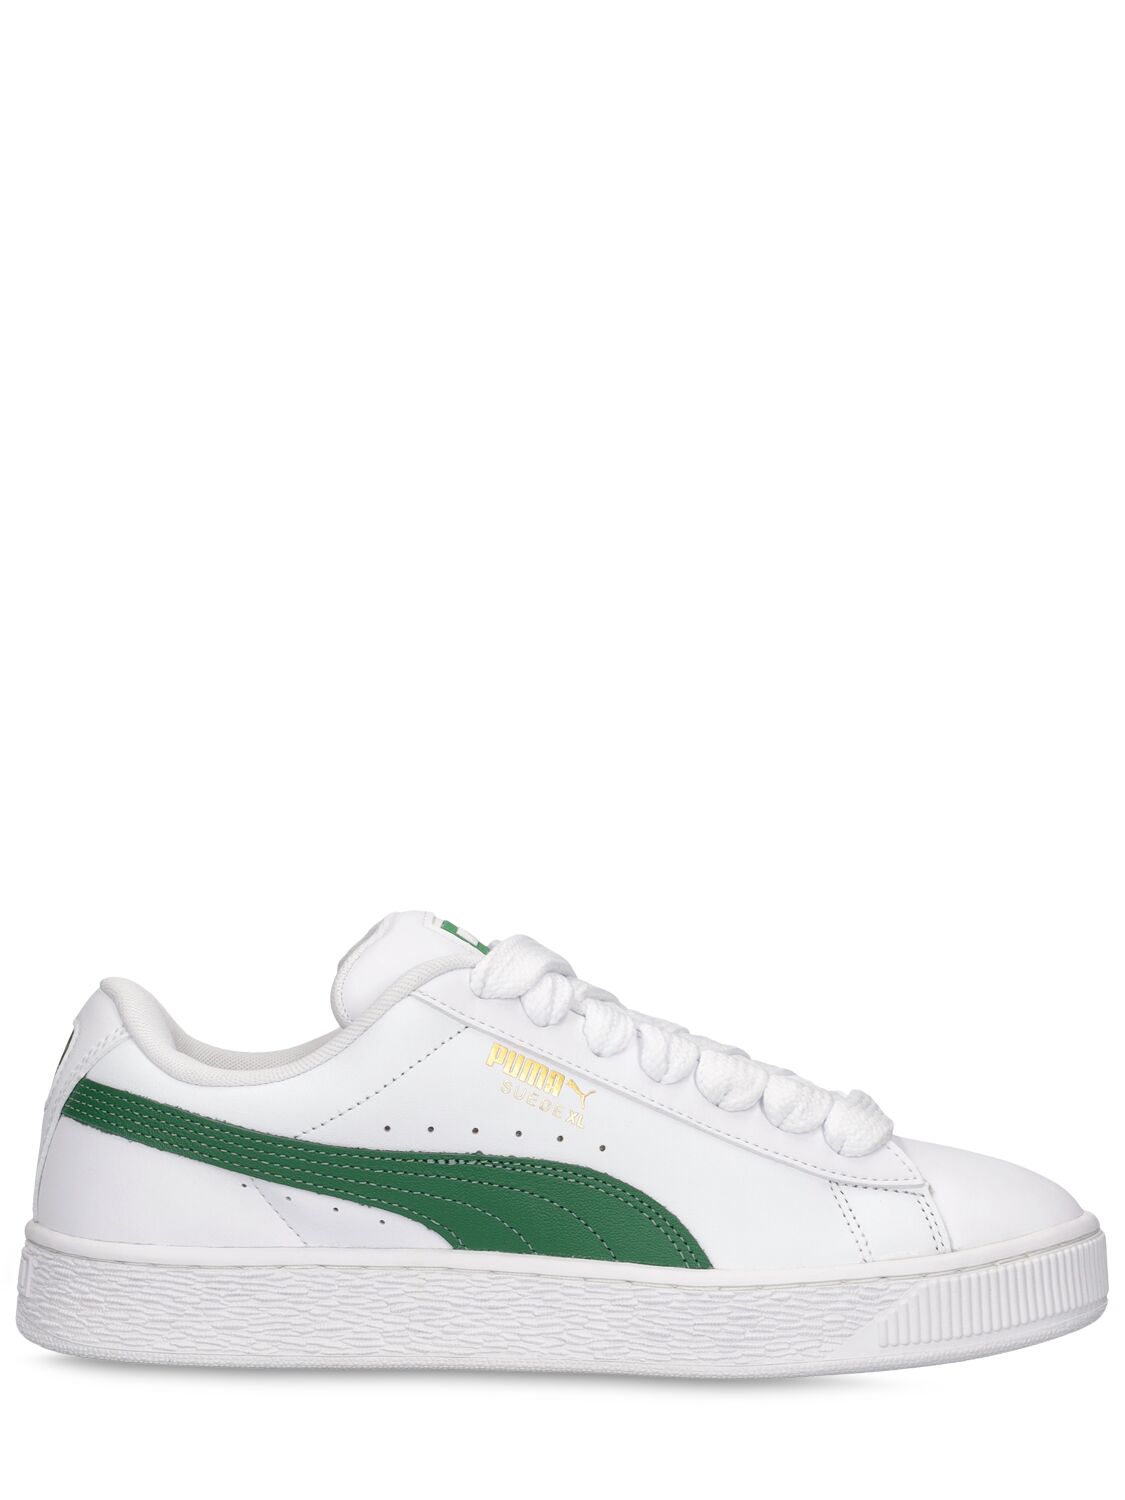 Shop Puma Xl Leather Sneakers In White,vine